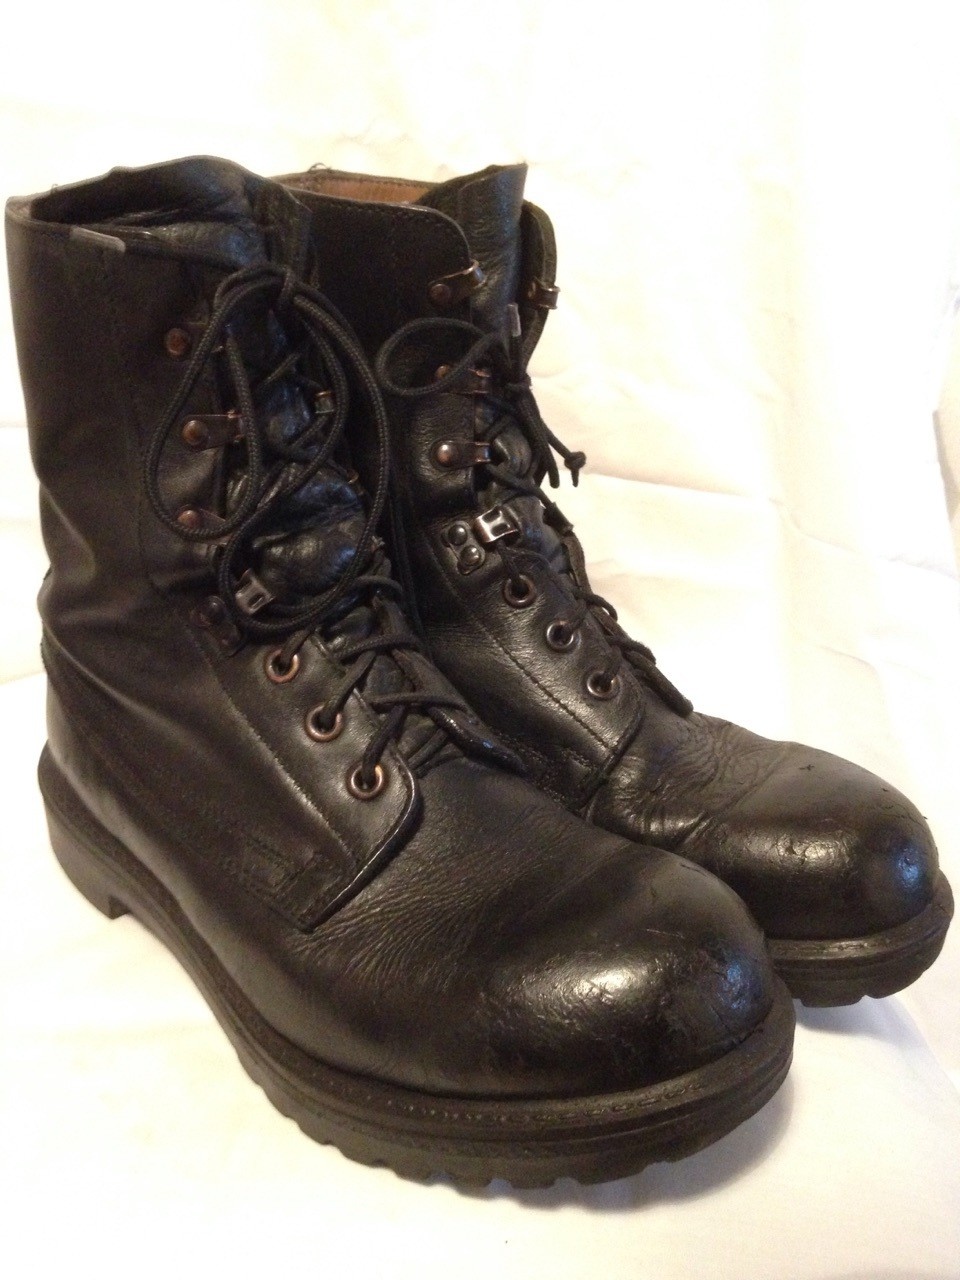 British Army Assault Boots Size 9L